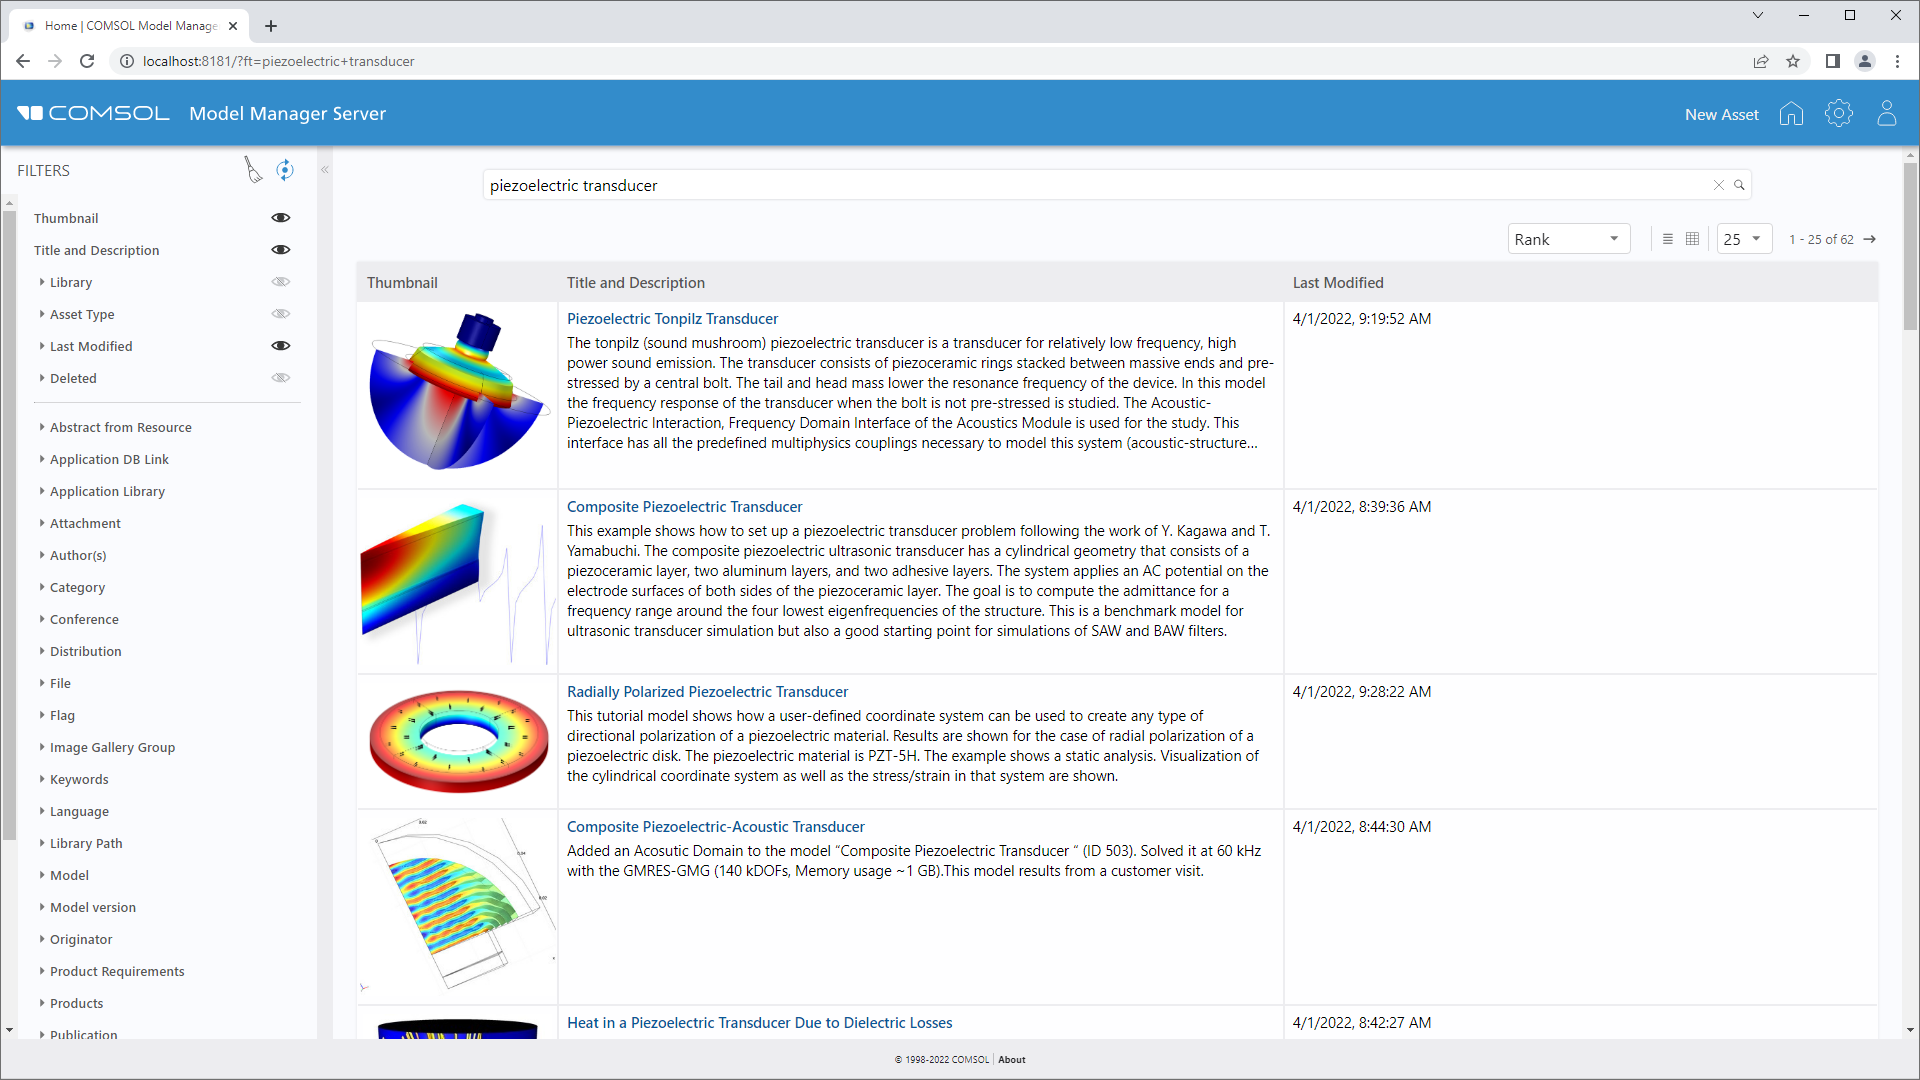 The Model Manager server web interface for managing assets related to modeling and simulation projects.